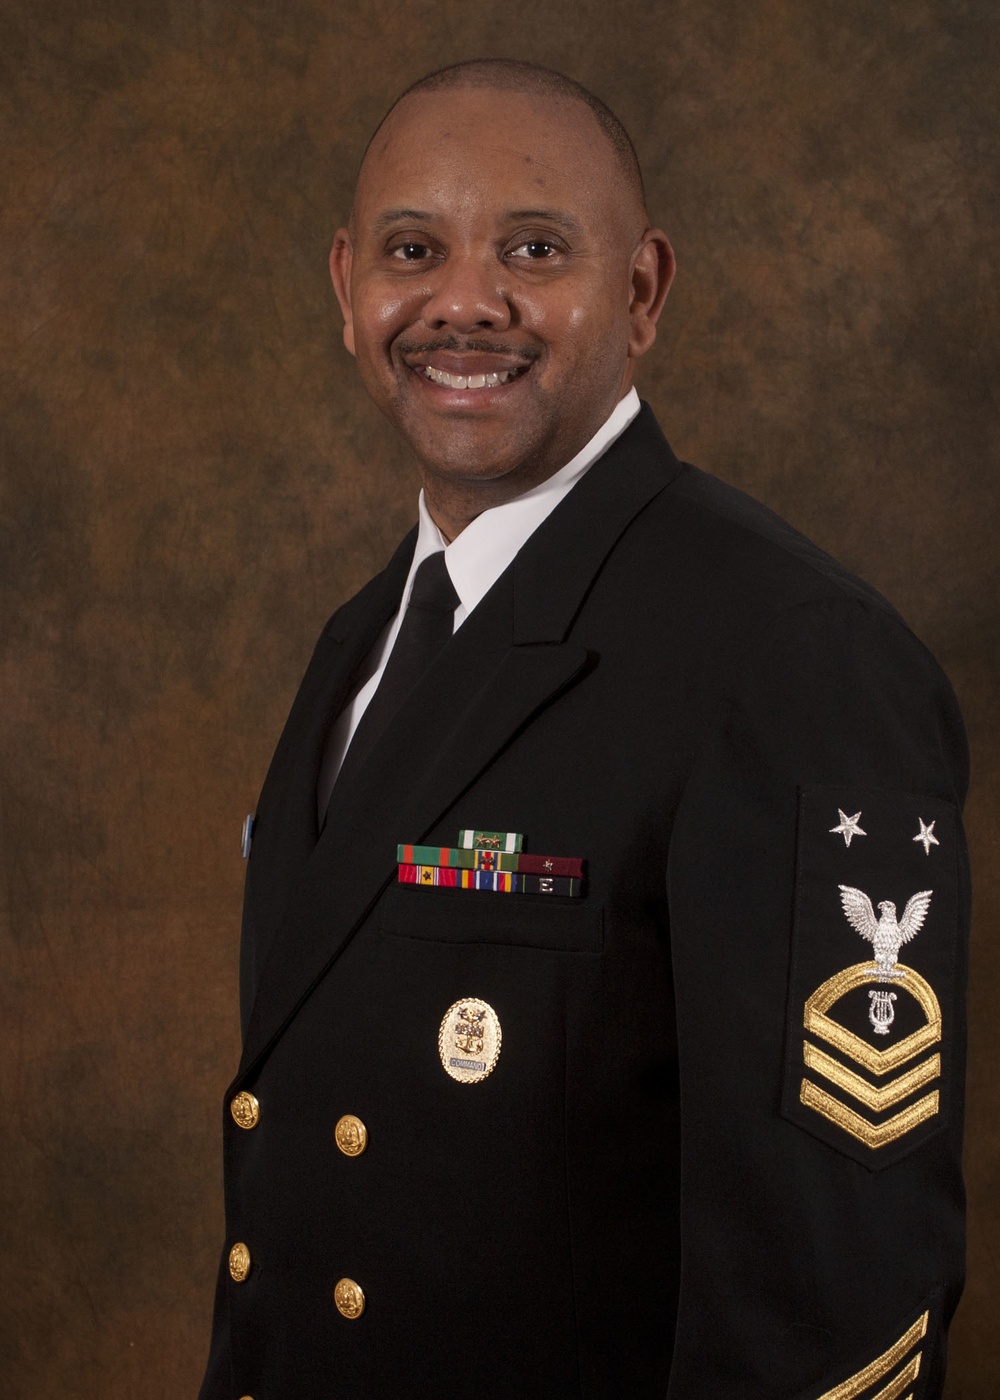 Navy Master Chief Petty Officer Dines supports the 58th Presidential Inauguration